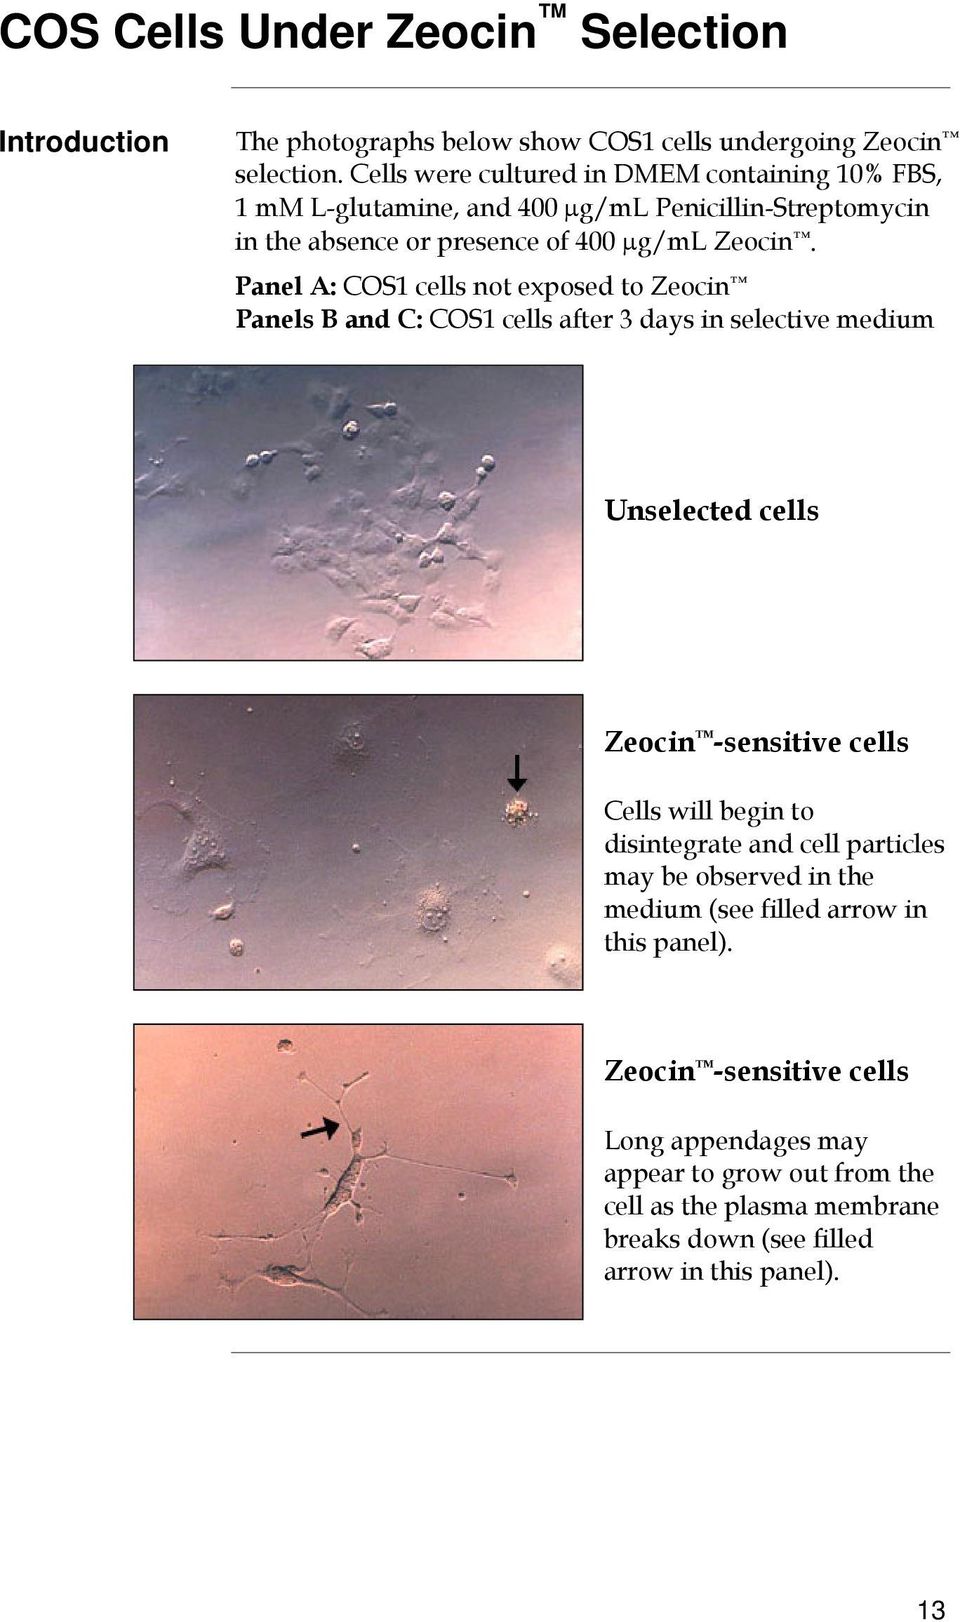 Panel A: COS1 cells not exposed to Zeocin Panels B and C: COS1 cells after 3 days in selective medium Unselected cells Zeocin -sensitive cells Cells will begin to